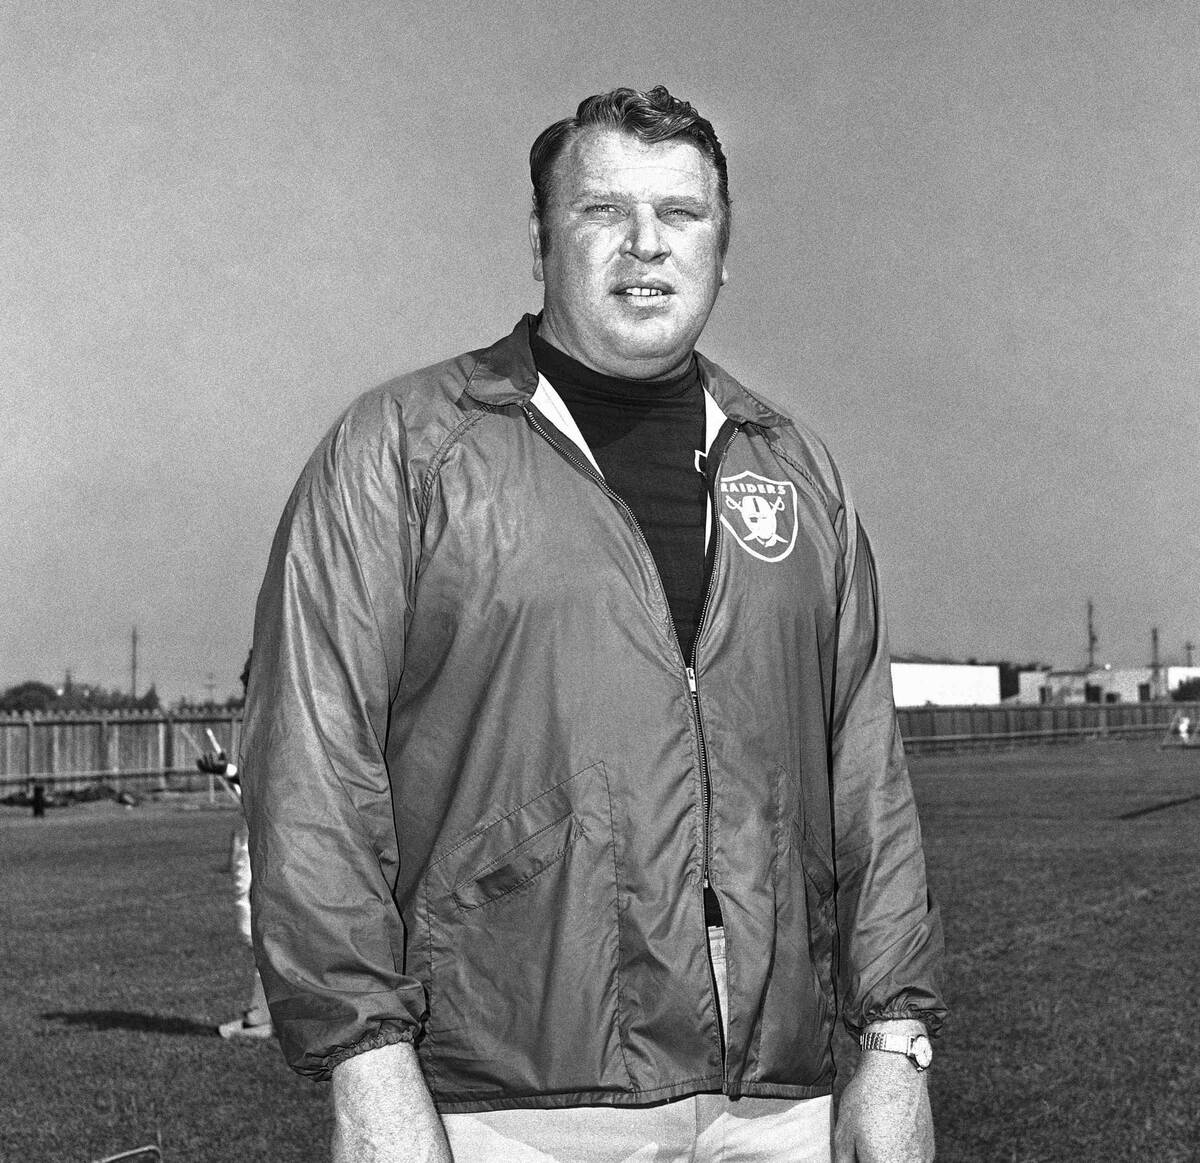 Head coach of Oakland Raiders John Madden on August 15, 1970. (AP Photo/RED)